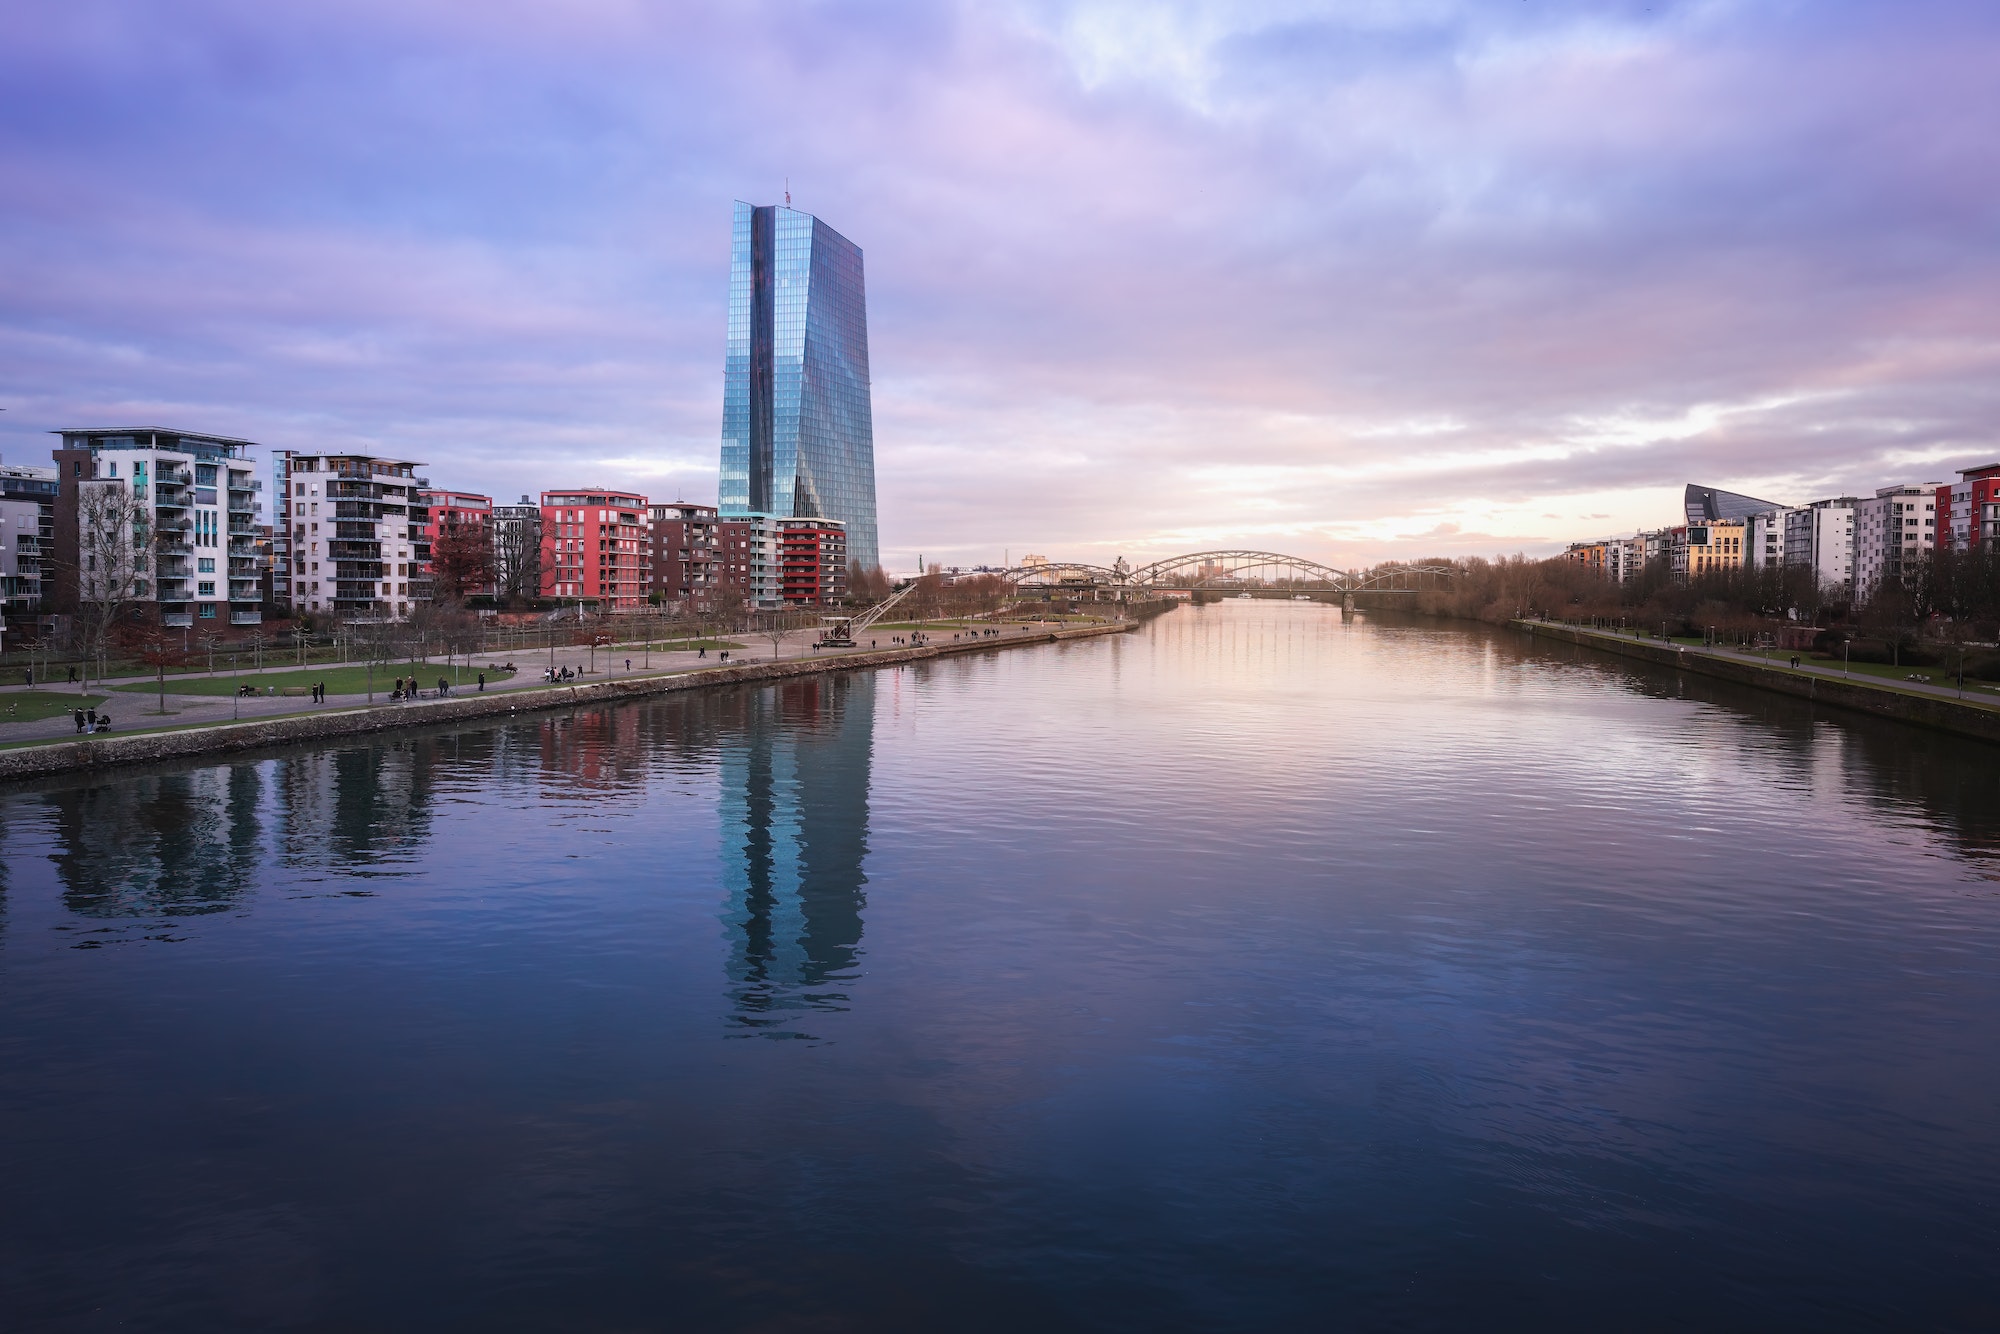 Main River skyline at sunset with ECB Tower (European Central Bank) - Frankfurt, Germany